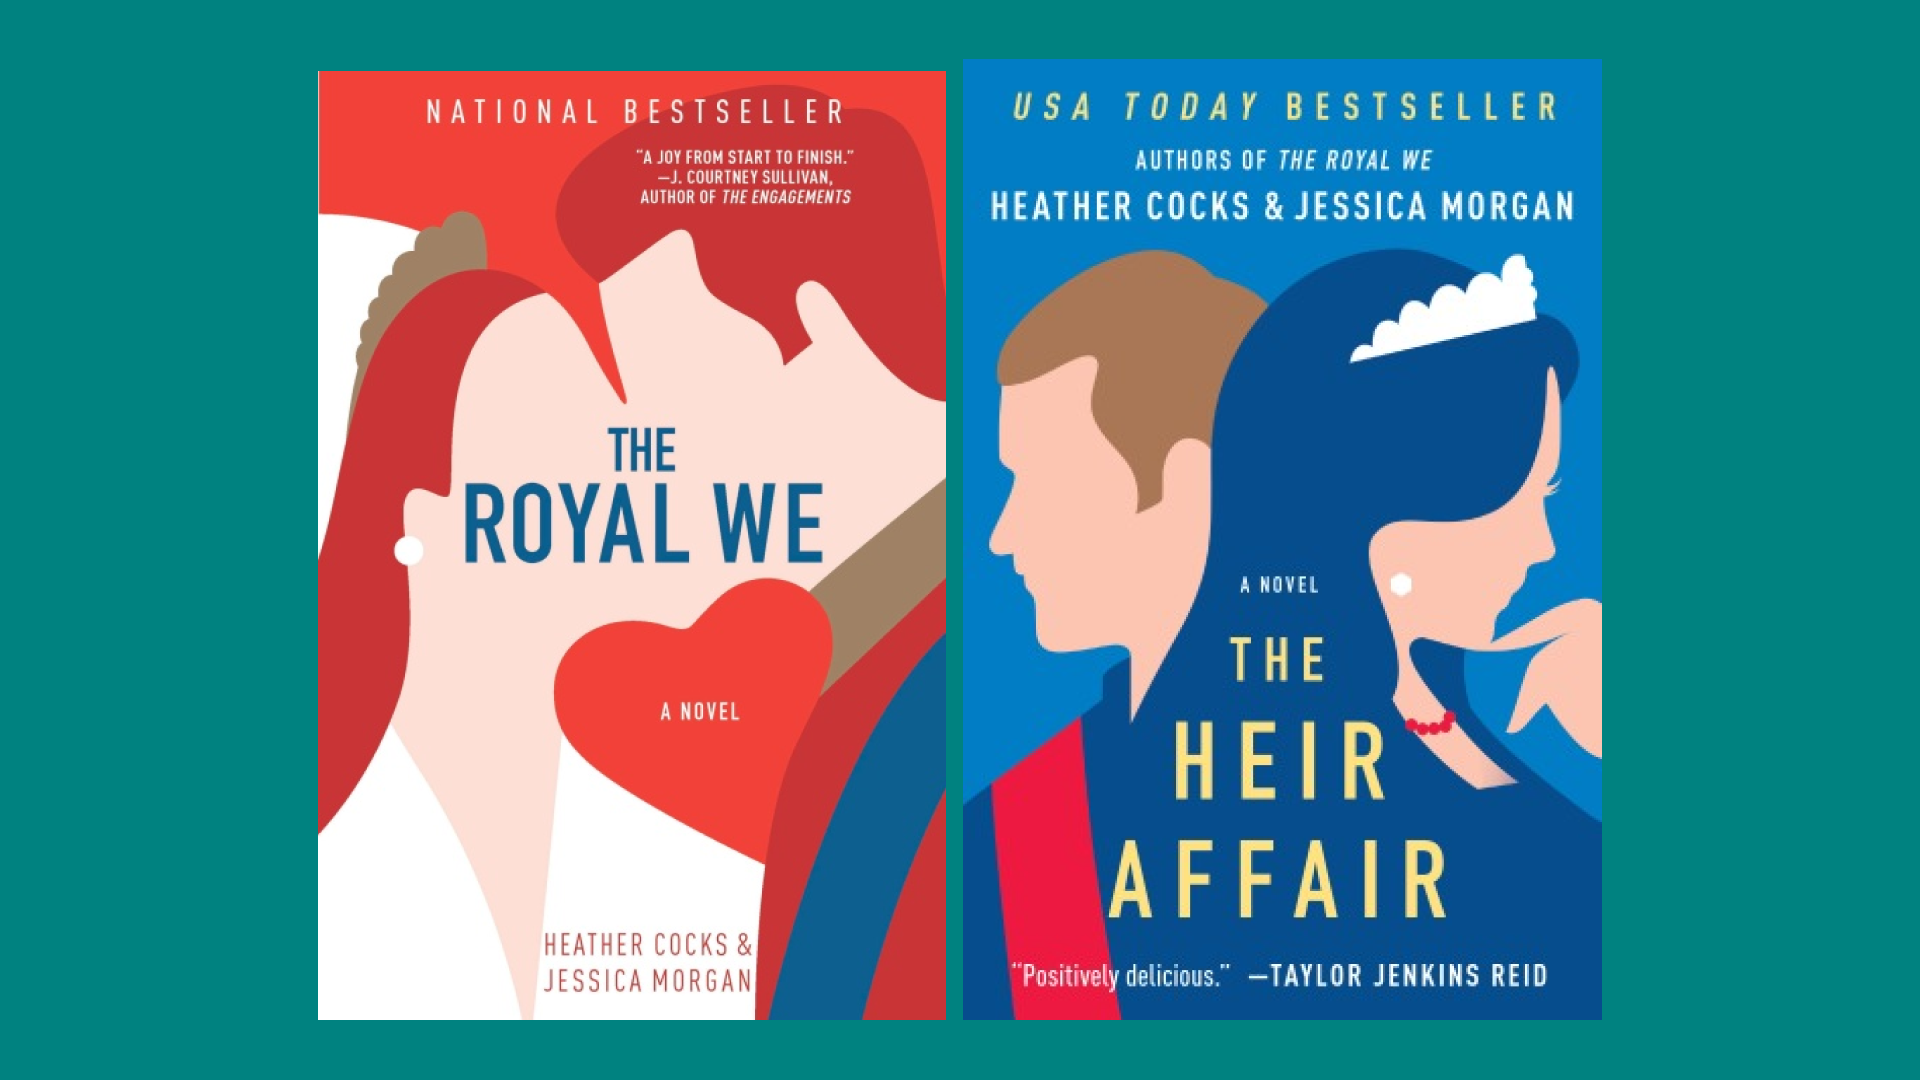 “The Royal We” and “The Heir Affair” by Heather Cocks and Jessica Morgan